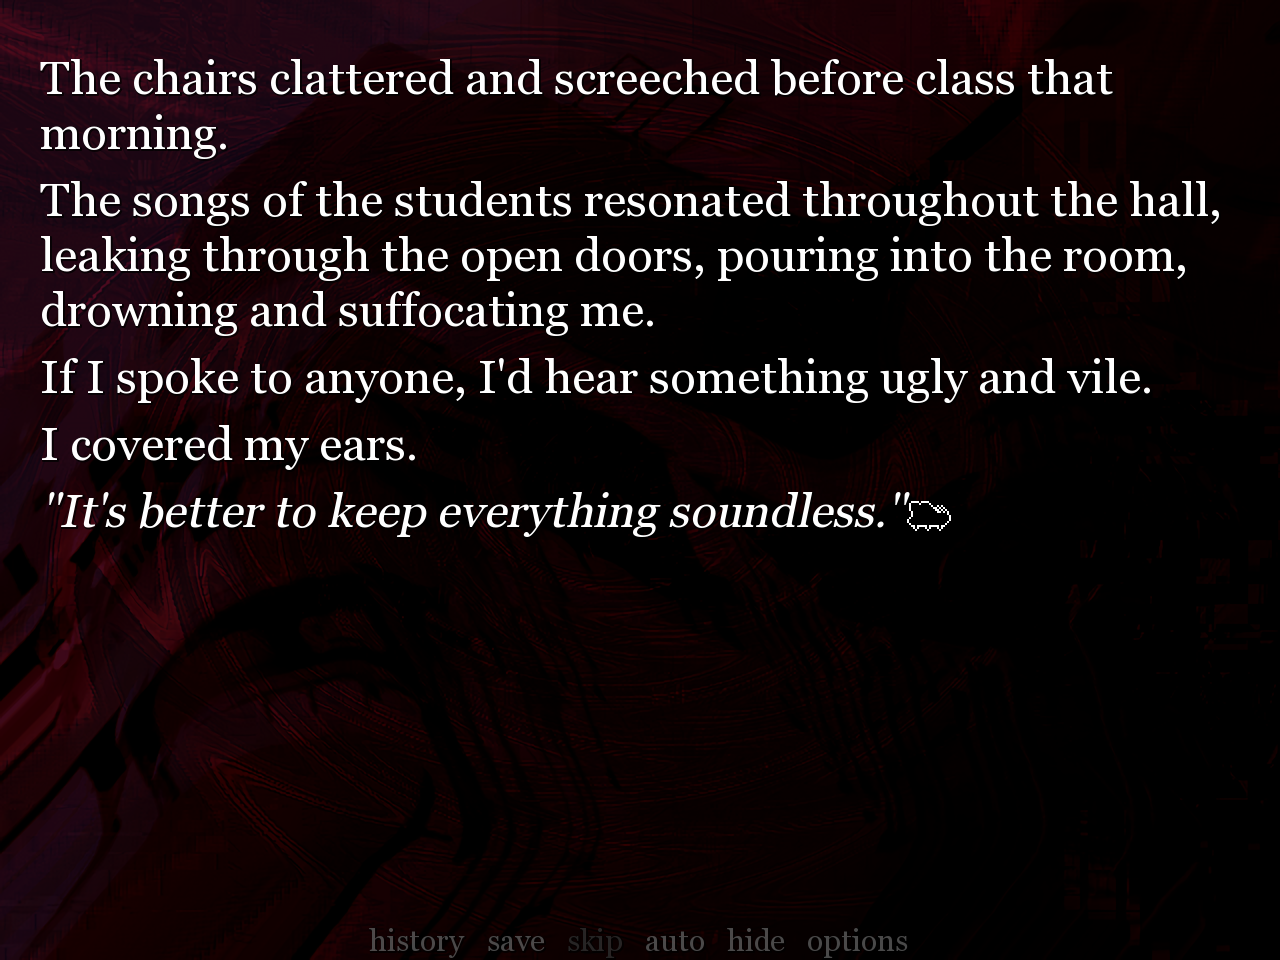 In-game screenshot of Mercy in class. The in-game text reads: The chairs clattered and screeched before class that morning. Our classroom was simple and uniform, with desks lining the room in neat rows and columns and a chalkboard up behind the teacher's podium. In that moment, however, it was distorted, tinted red. The songs of the students resonated throughout the hall, leaking through the open doors, pouring into the room, drowning and suffocating me. If I spoke to anyone, I'd hear something ugly and vile. I covered my ears. It's better to keep everything soundless, I thought.